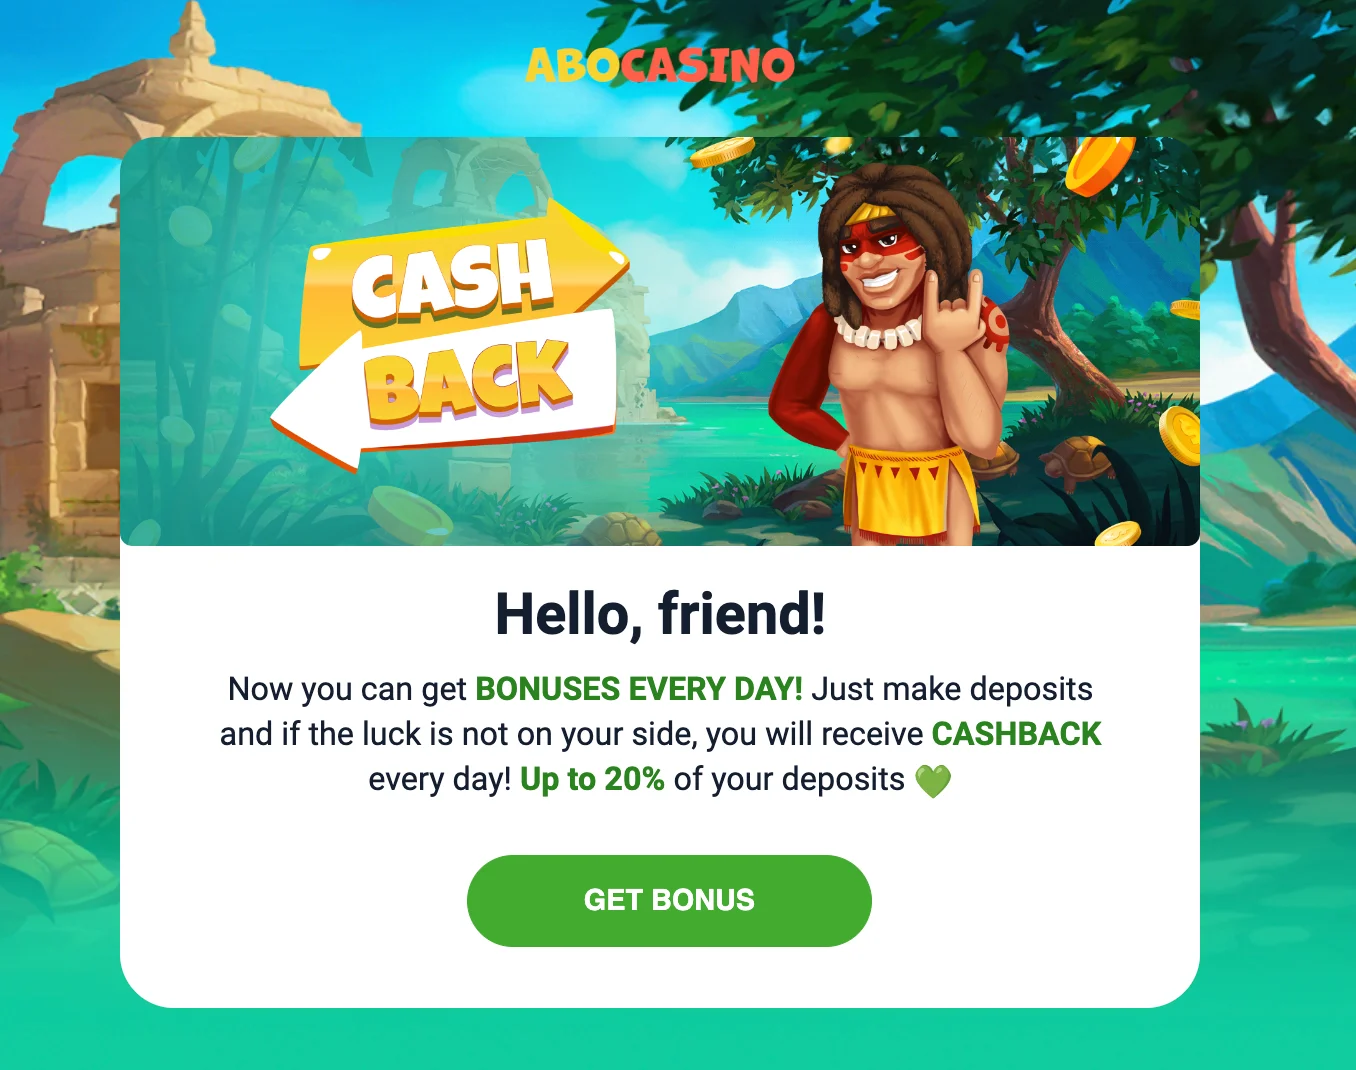 Abo Casino cashback daily code on email